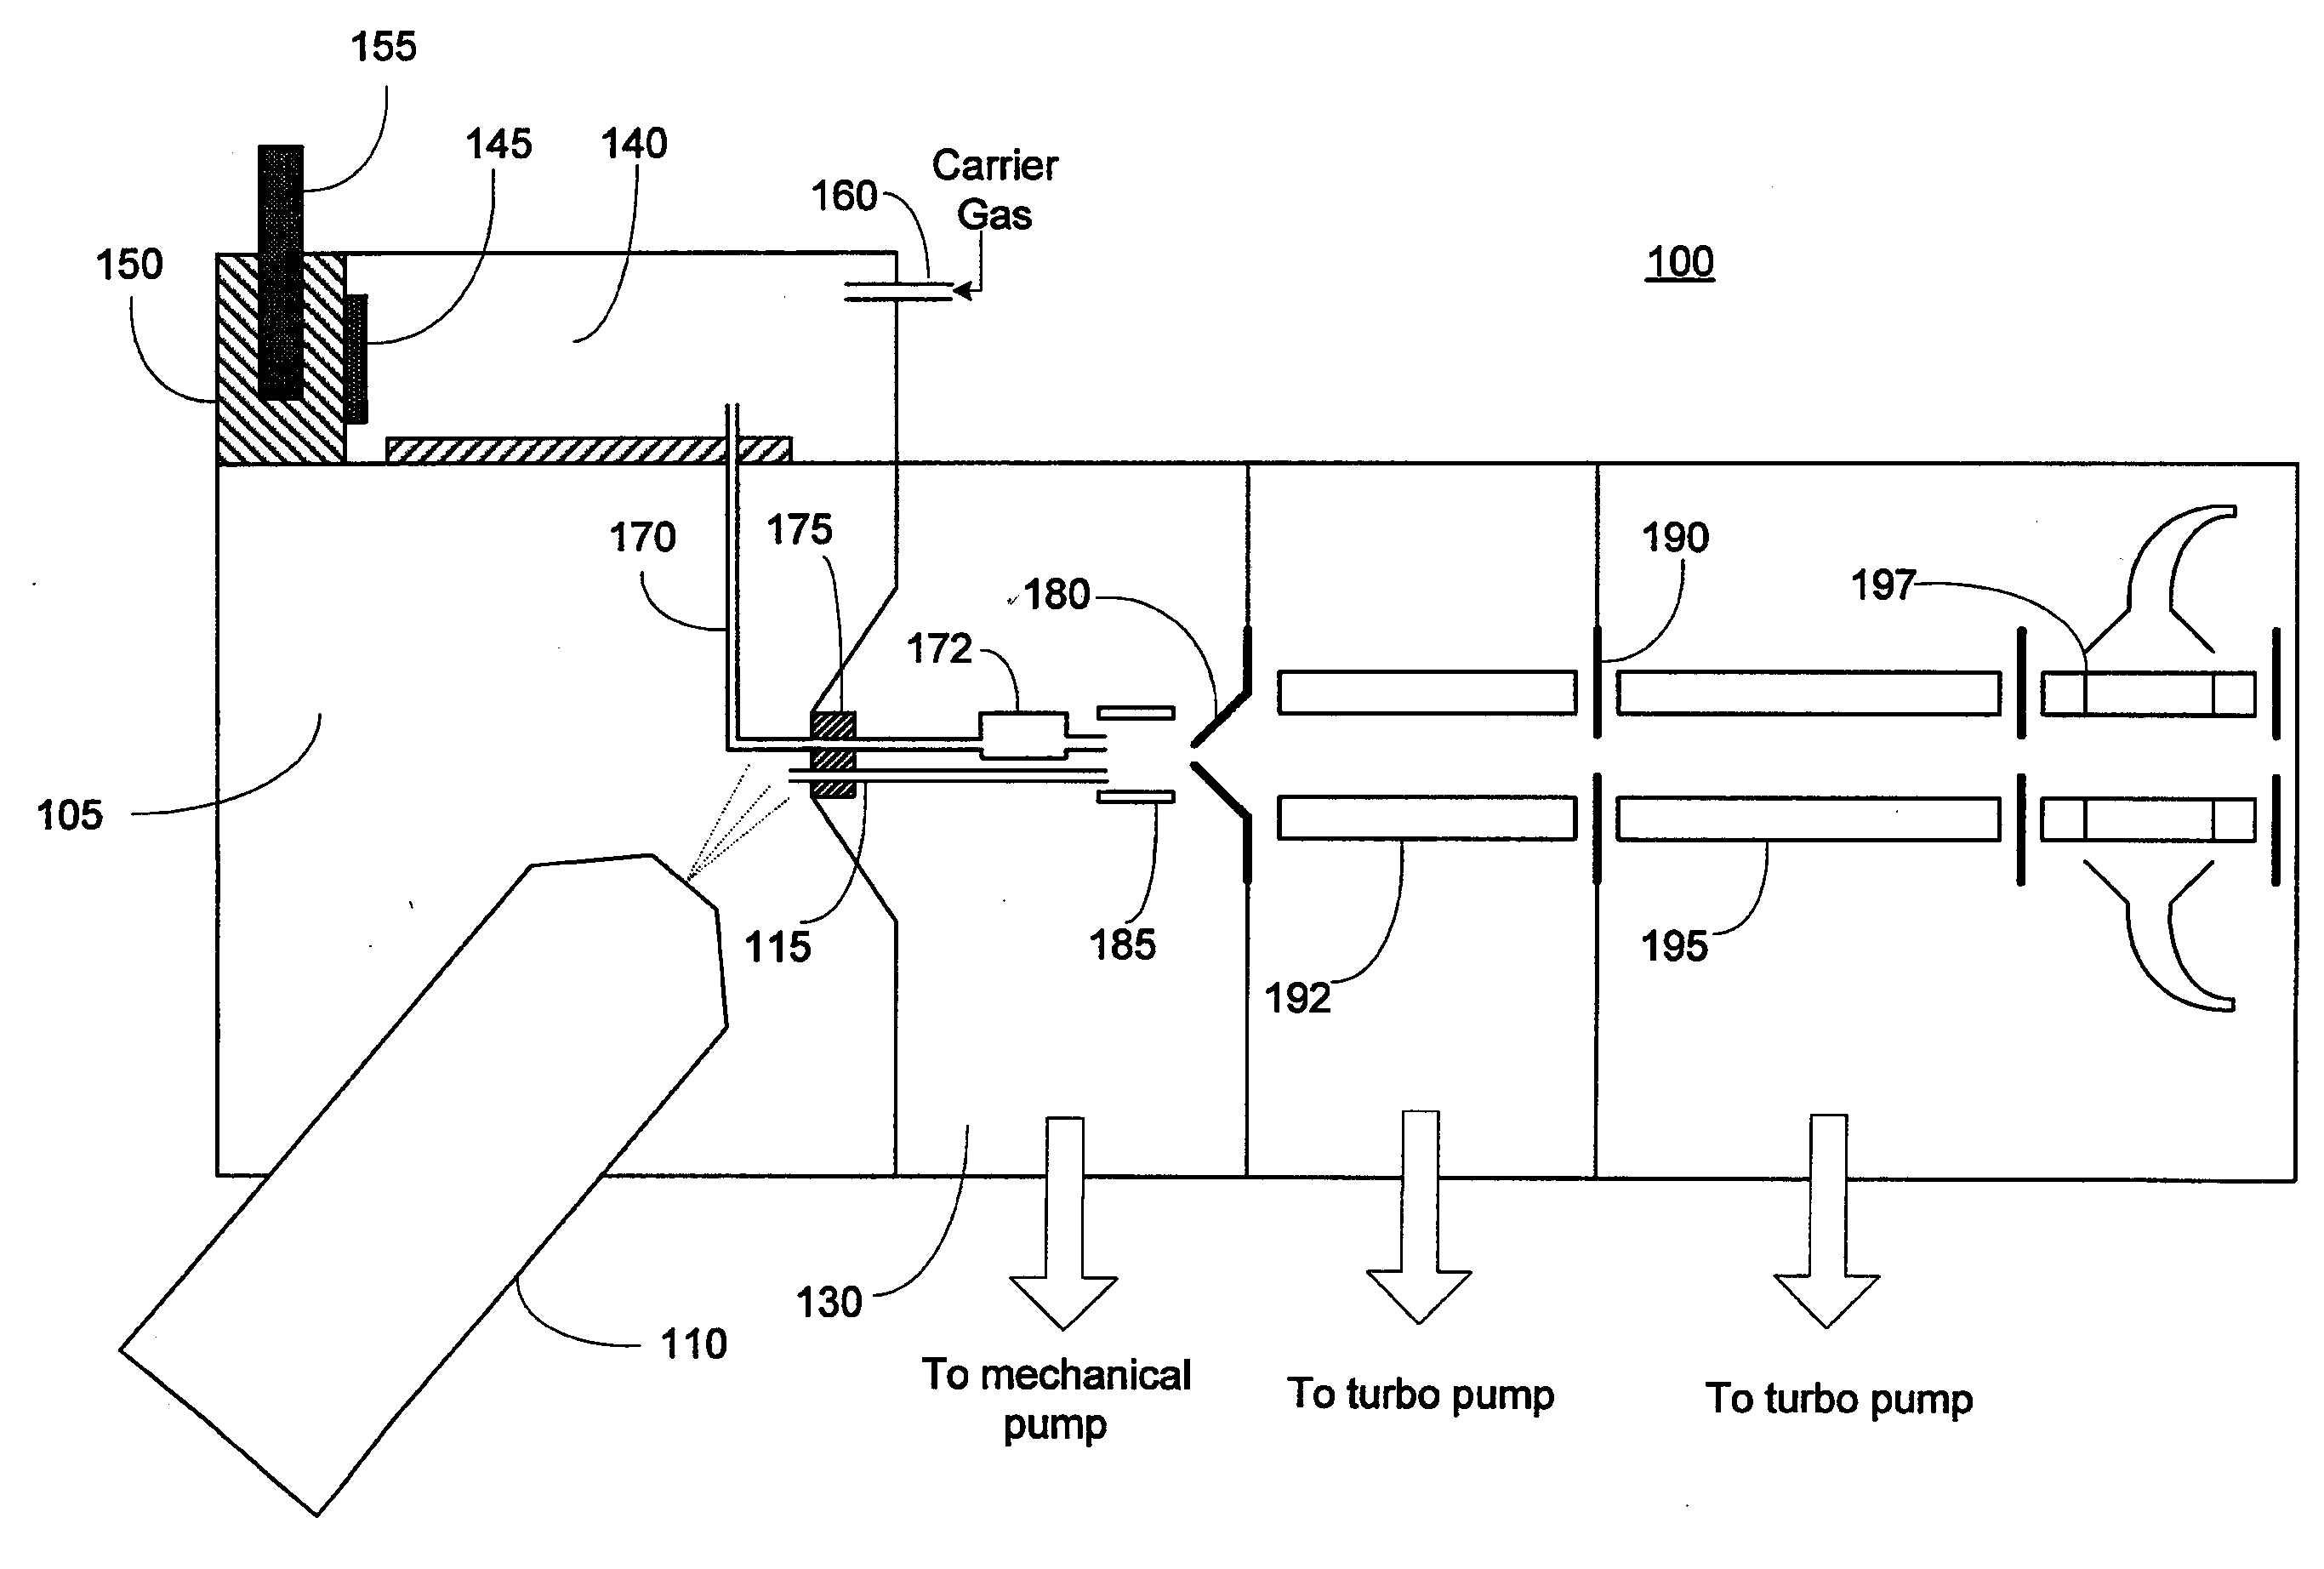 Method and Apparatus for Generation of Reagent Ions in a Mass Spectrometer